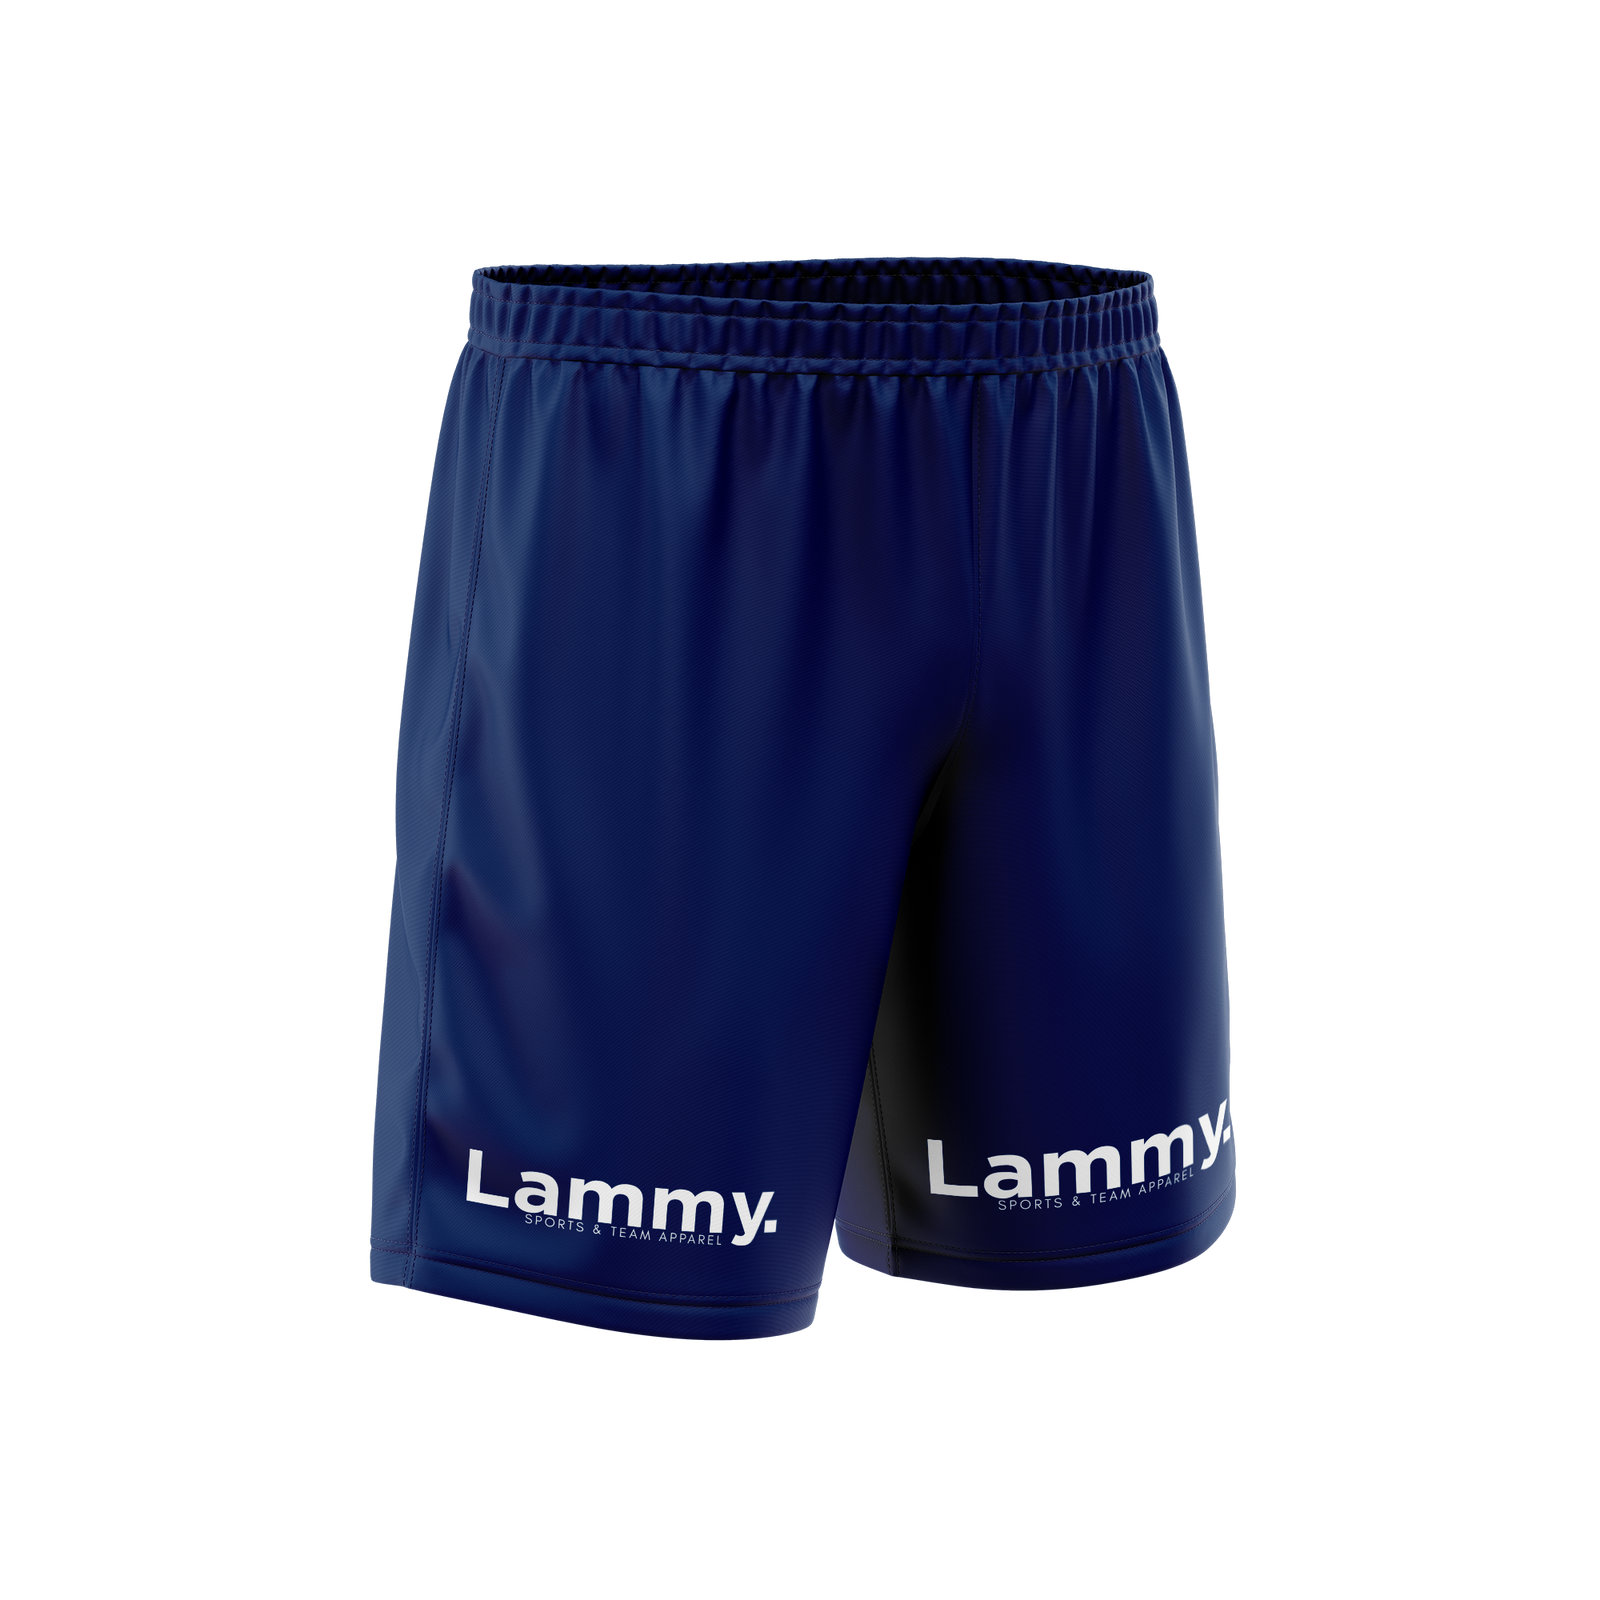 GB Police Masters RL Adult Leisure Shorts